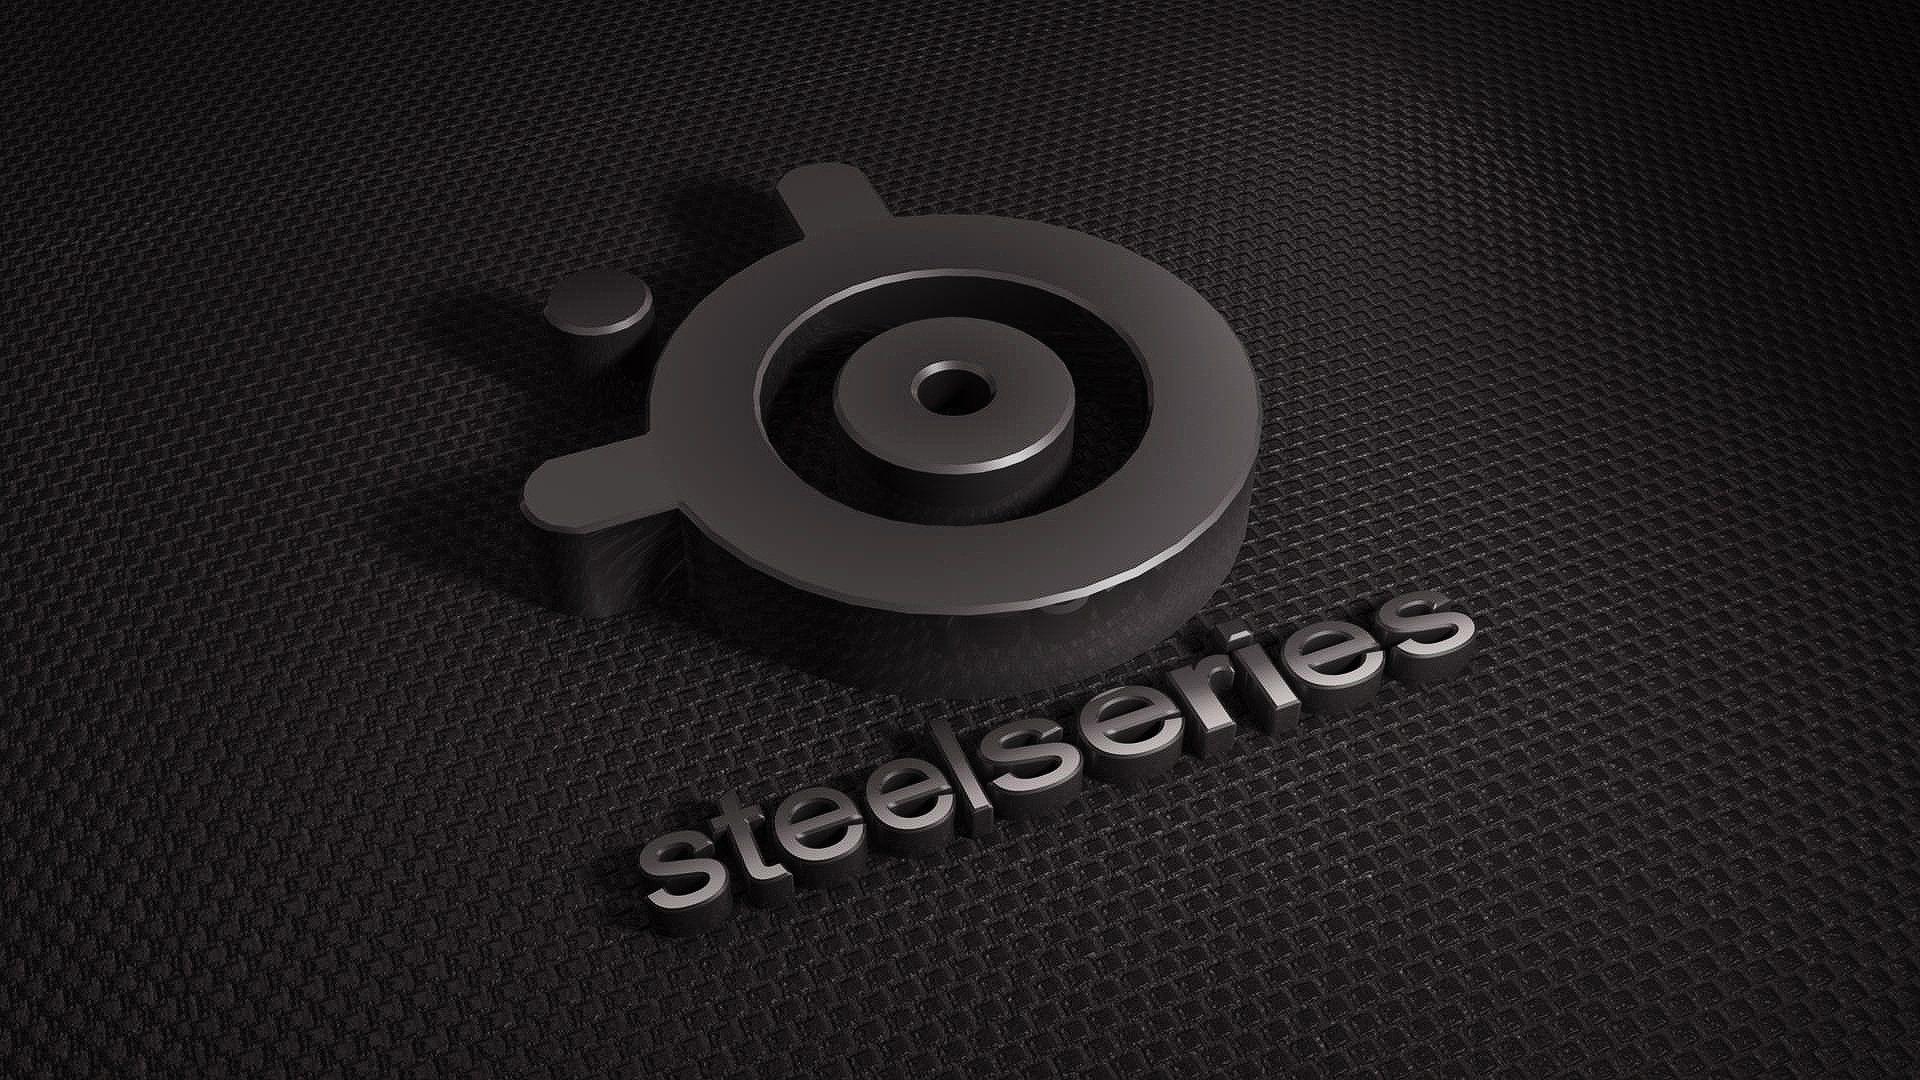 Featured image of post Steelseries Wallpaper Iphone wallpapers free download these wallpapers are free download for pc laptop iphone android advertisements